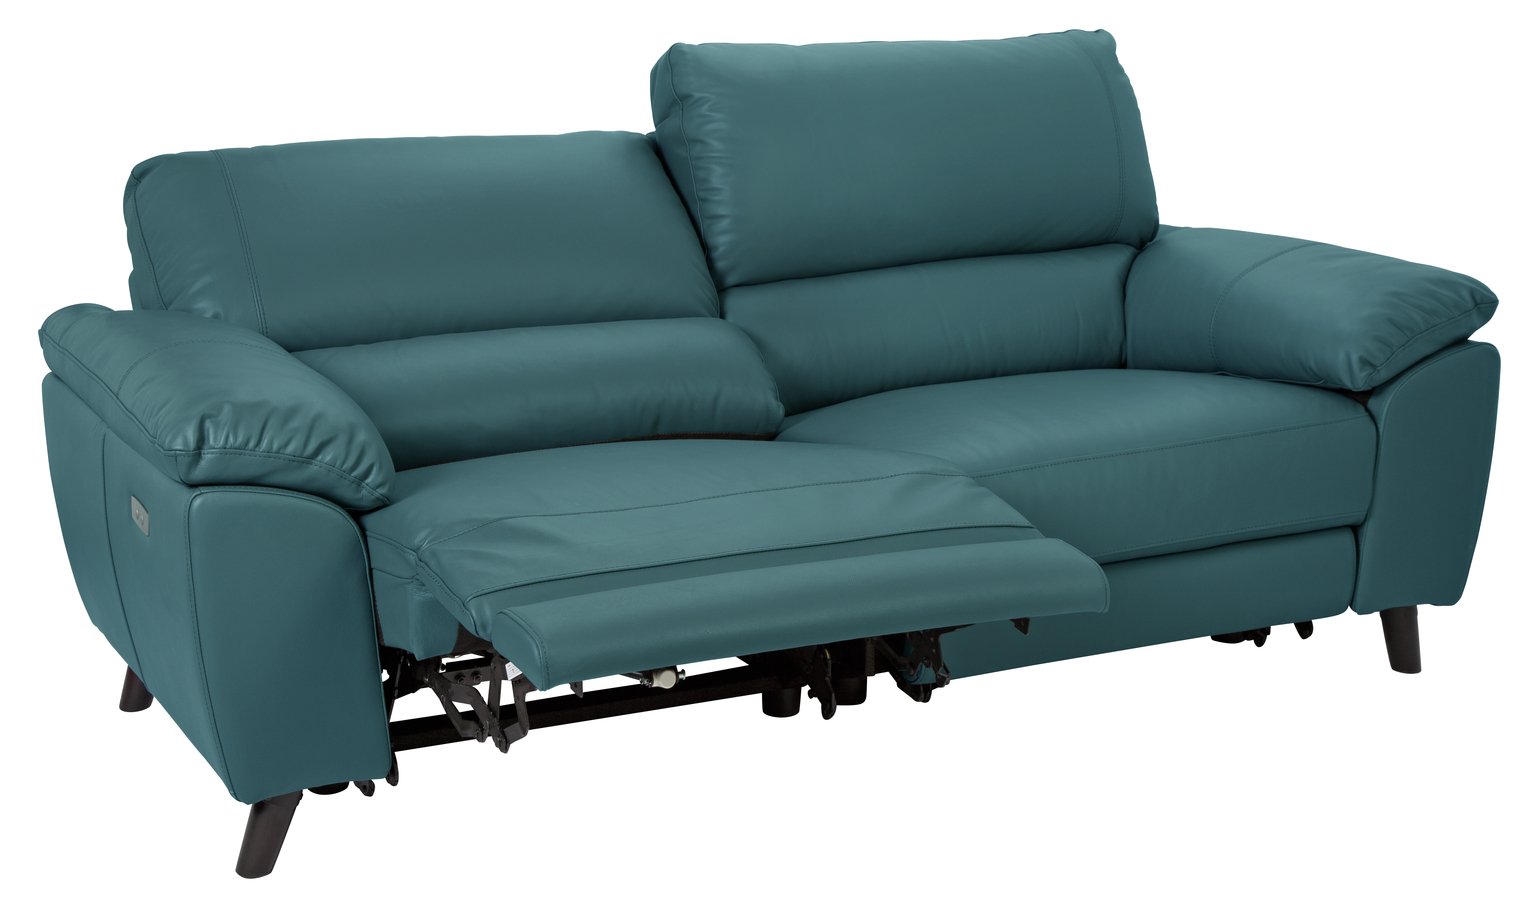 Argos Home Elliot 3 Seater Leather Mix Recliner Sofa Review